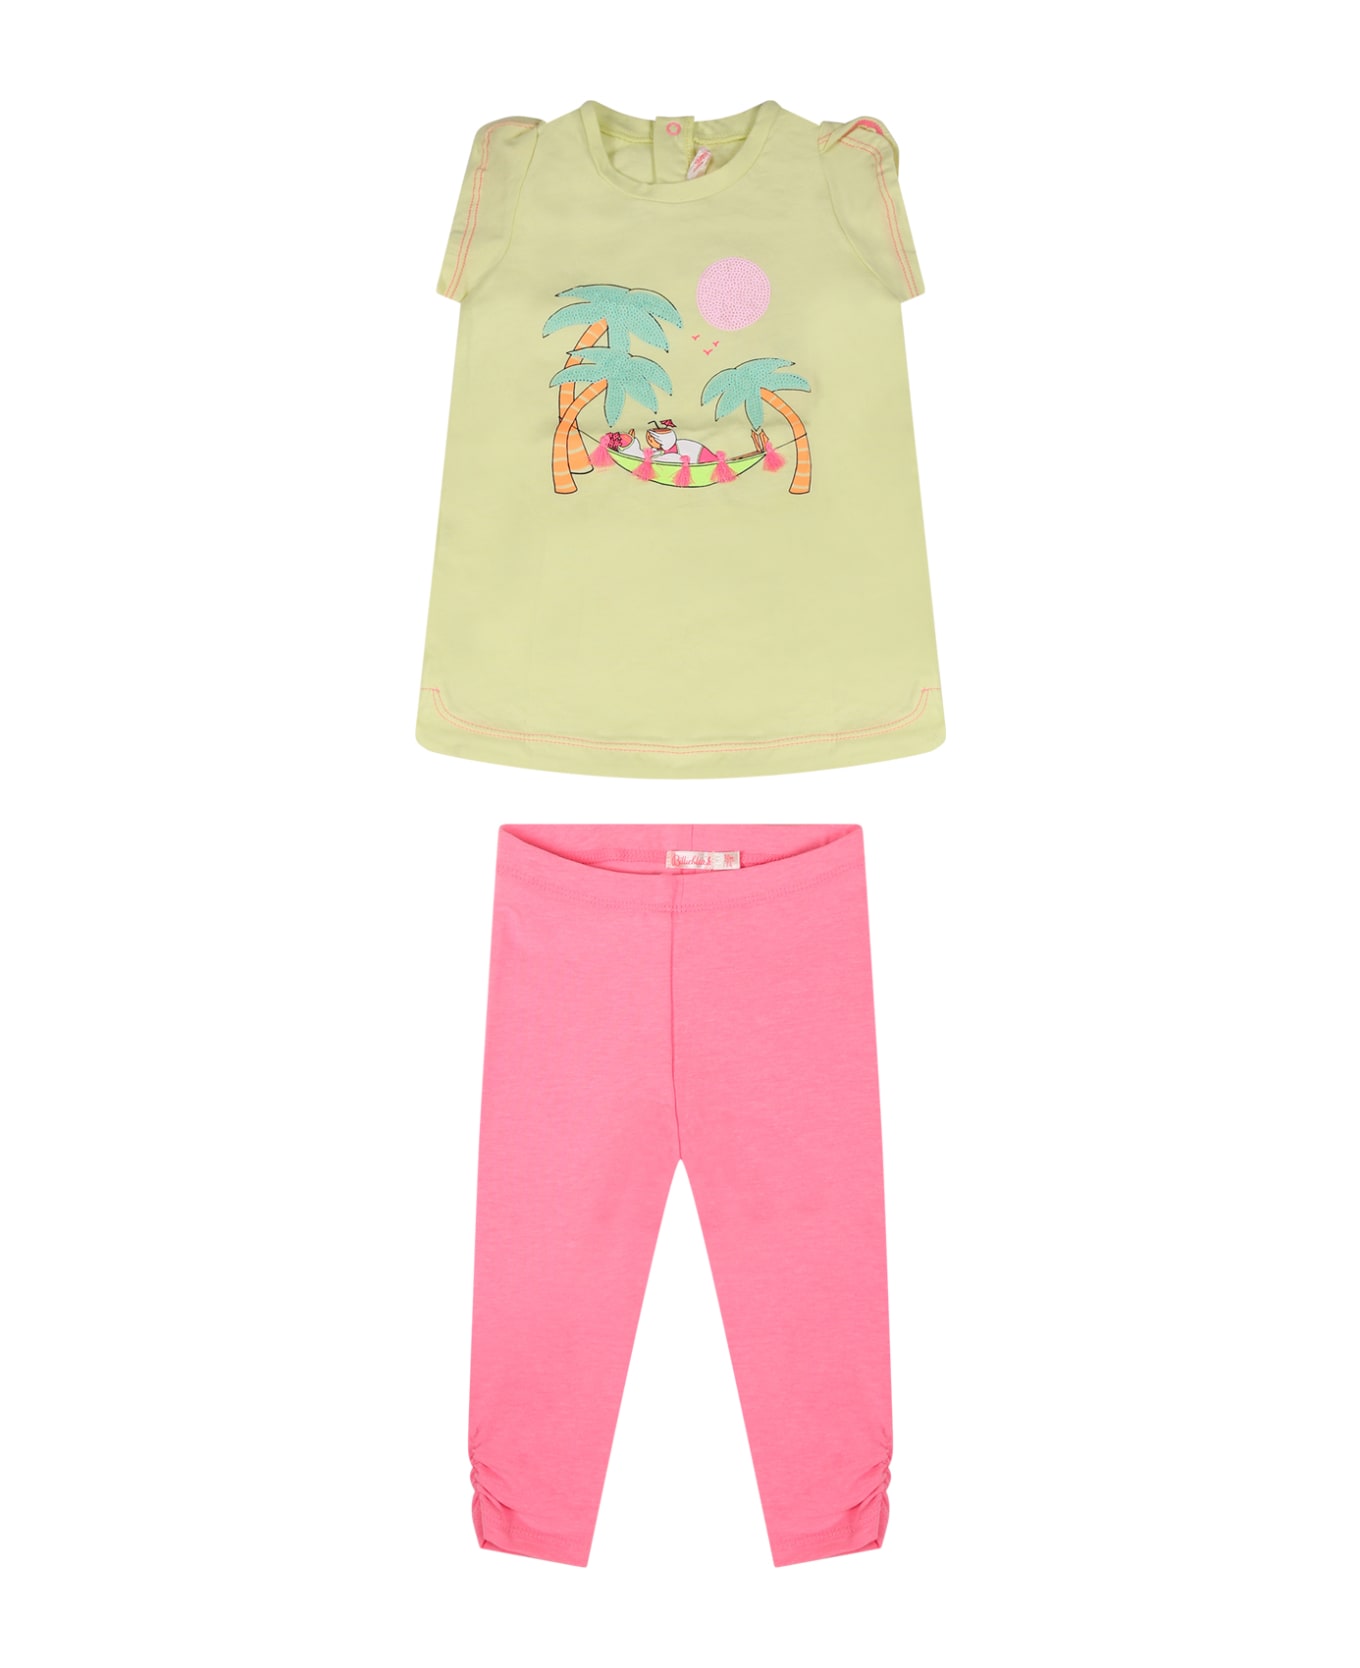 Billieblush Multicolor Set For Baby Girl With Print - Multicolor